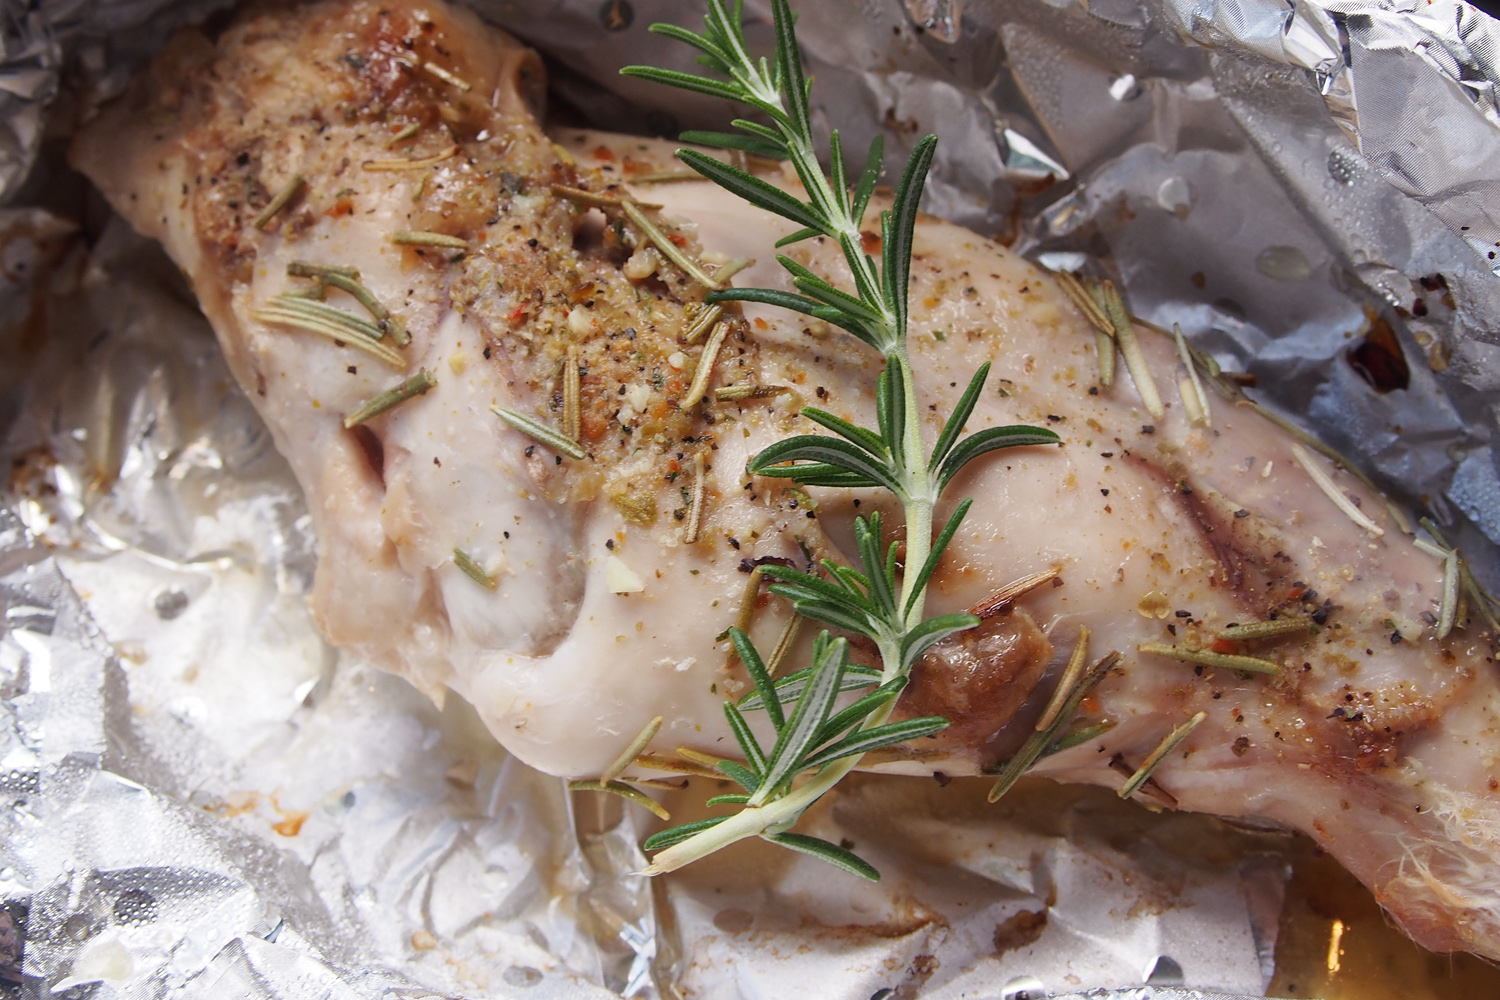 Grilled rabbit meat with herbs